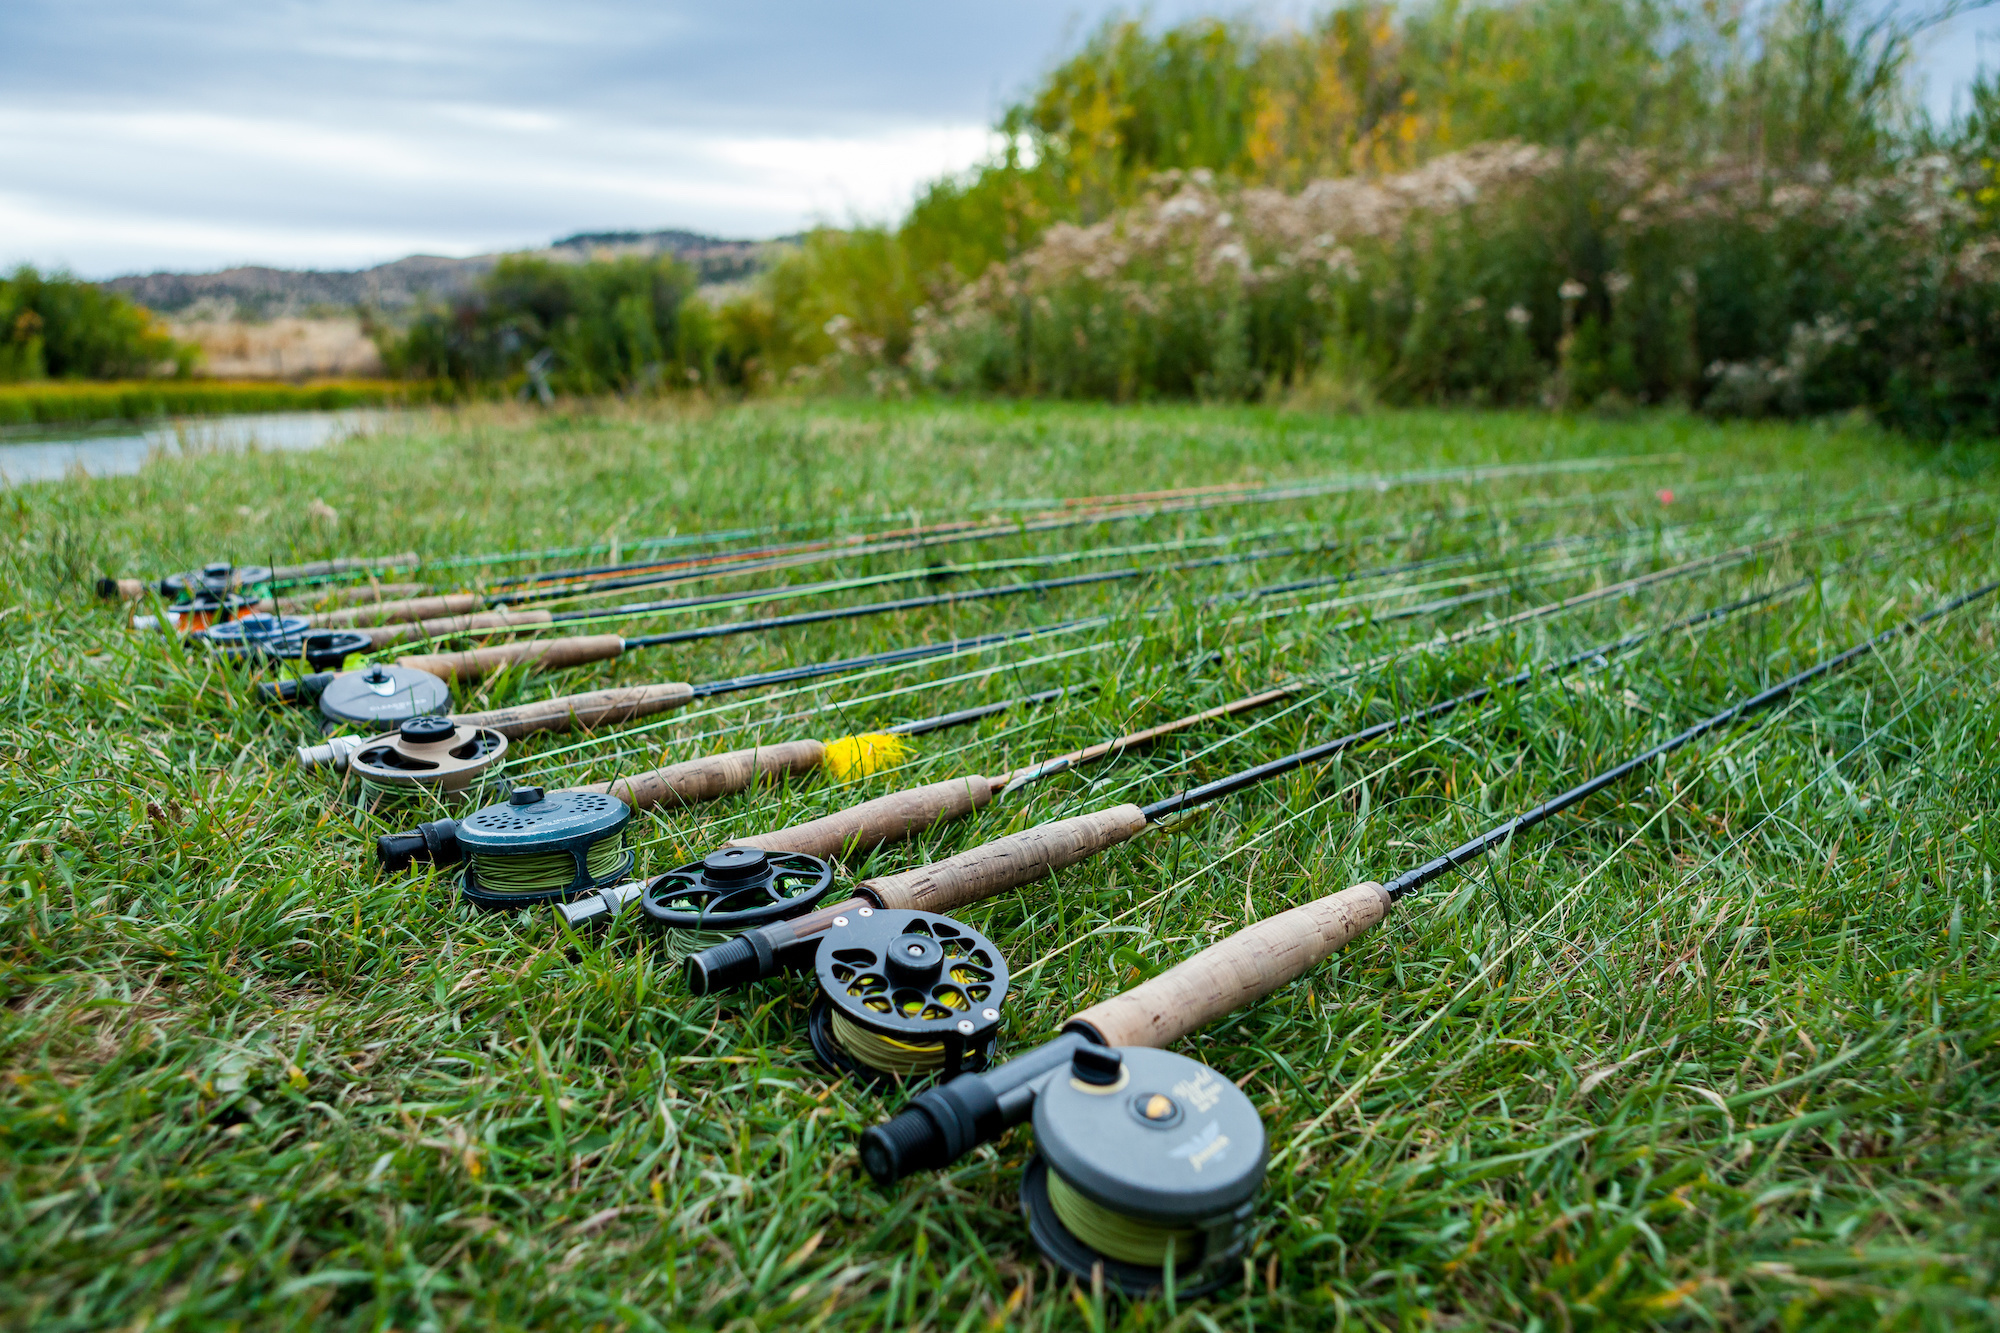 Fly Fishing Guides: Are They Worth The Money? - Spencer Durrant Outdoors